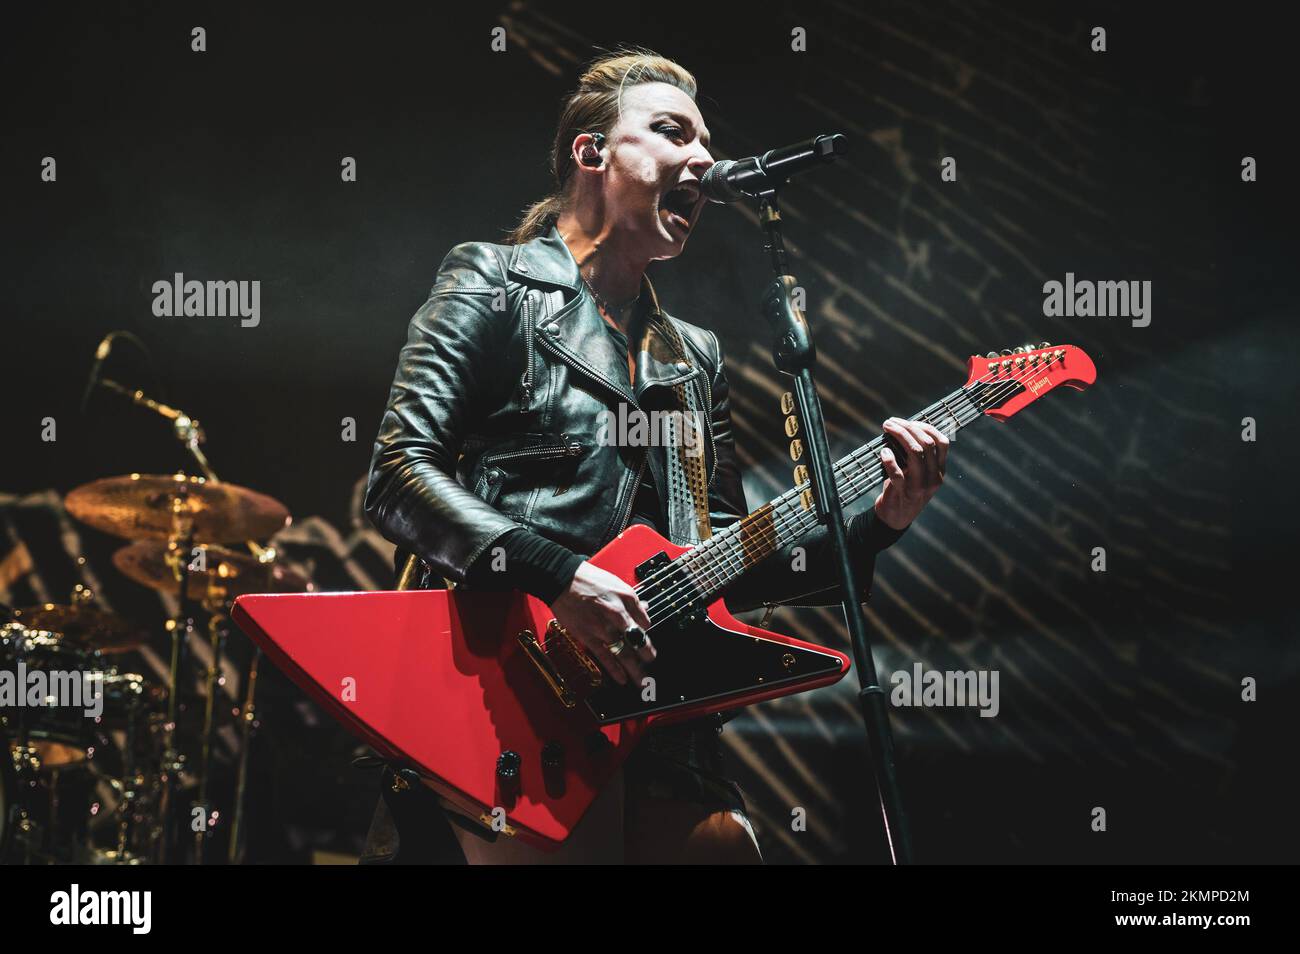 ITALY, MILAN, NOVEMBER 25TH 2022: The American musician, singer and composer Lzzy Hale, founder and leader of the rock band Halestorm, performing live on stage in Milan, opening for the Alter Bridge “Pawns & Kings” European tour. Stock Photo